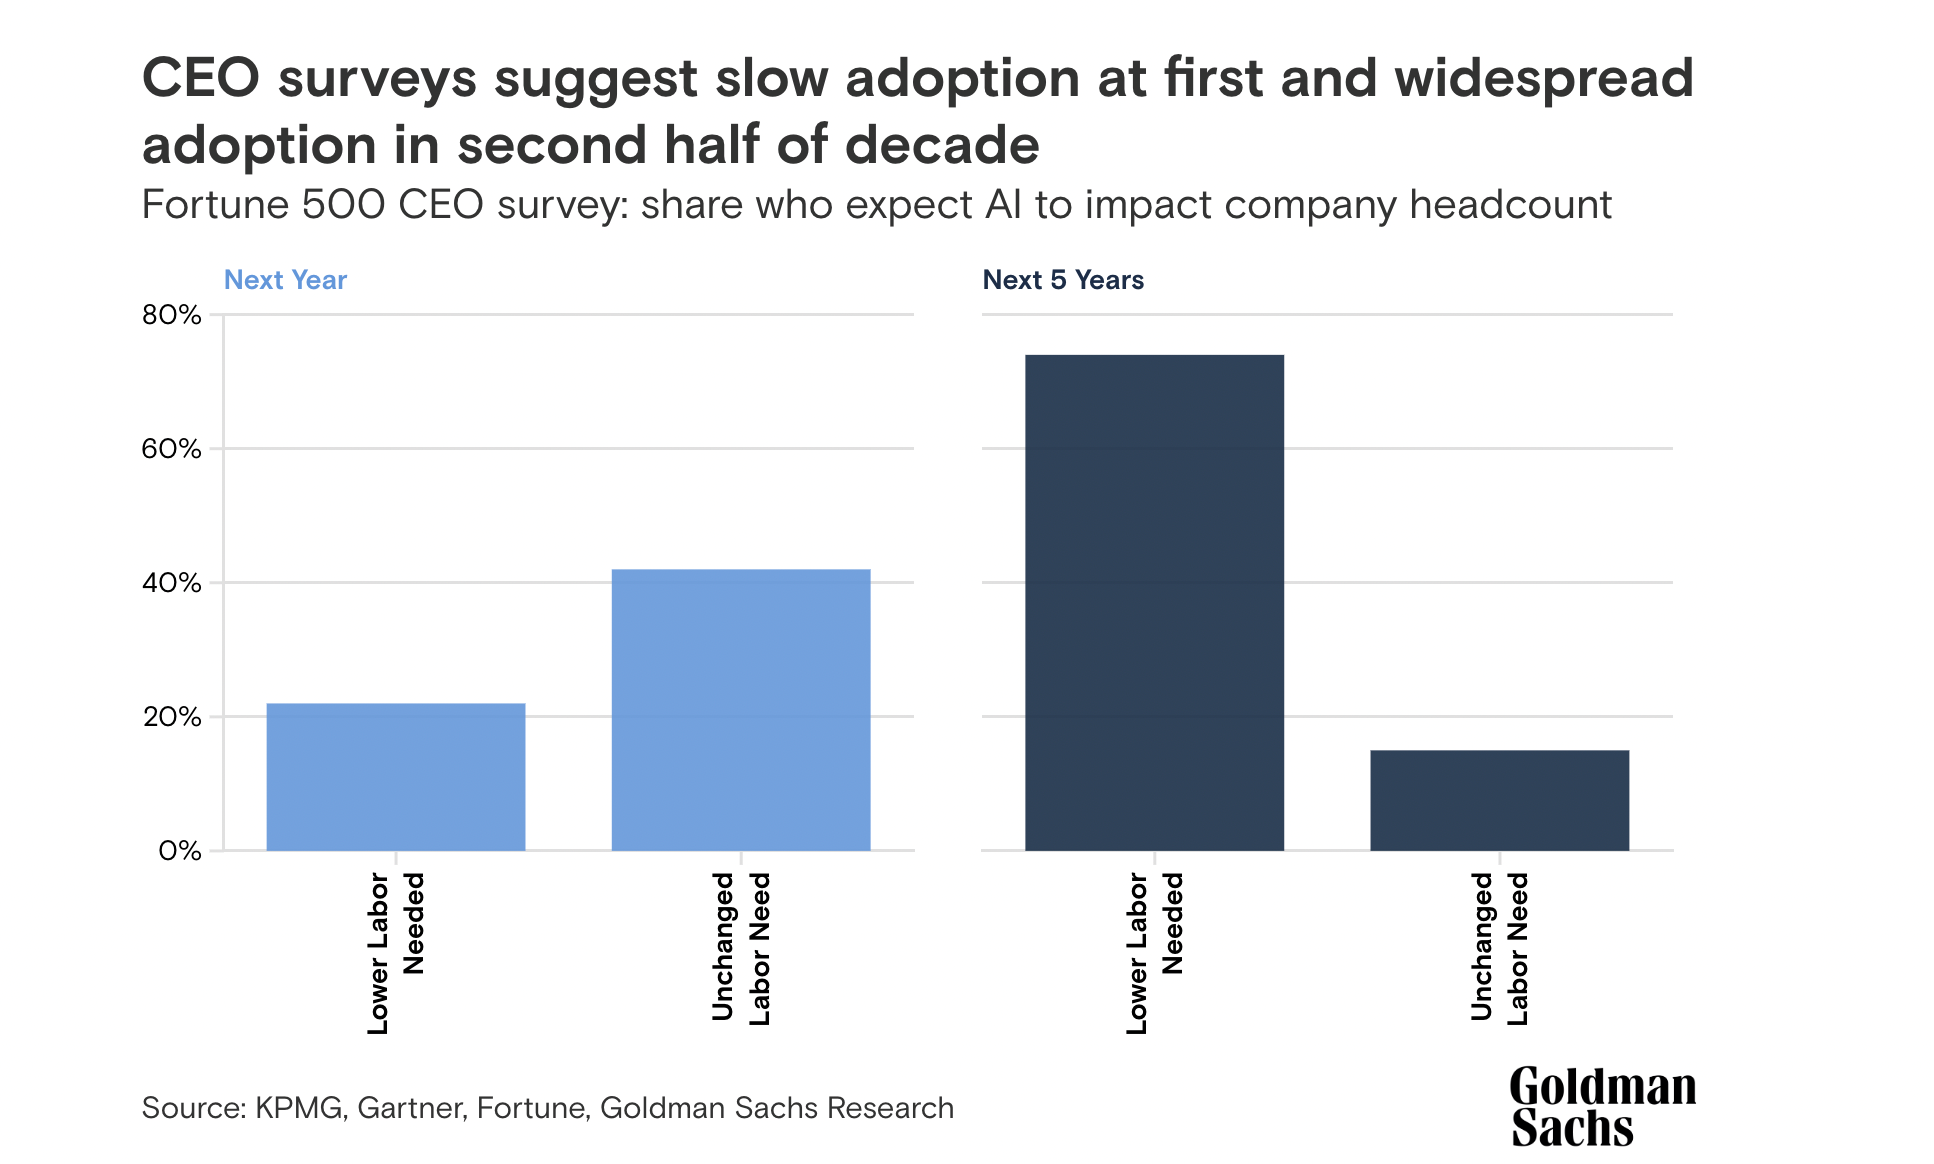 Fortune 500 CEO survey: share who expect AI to impact company headcount